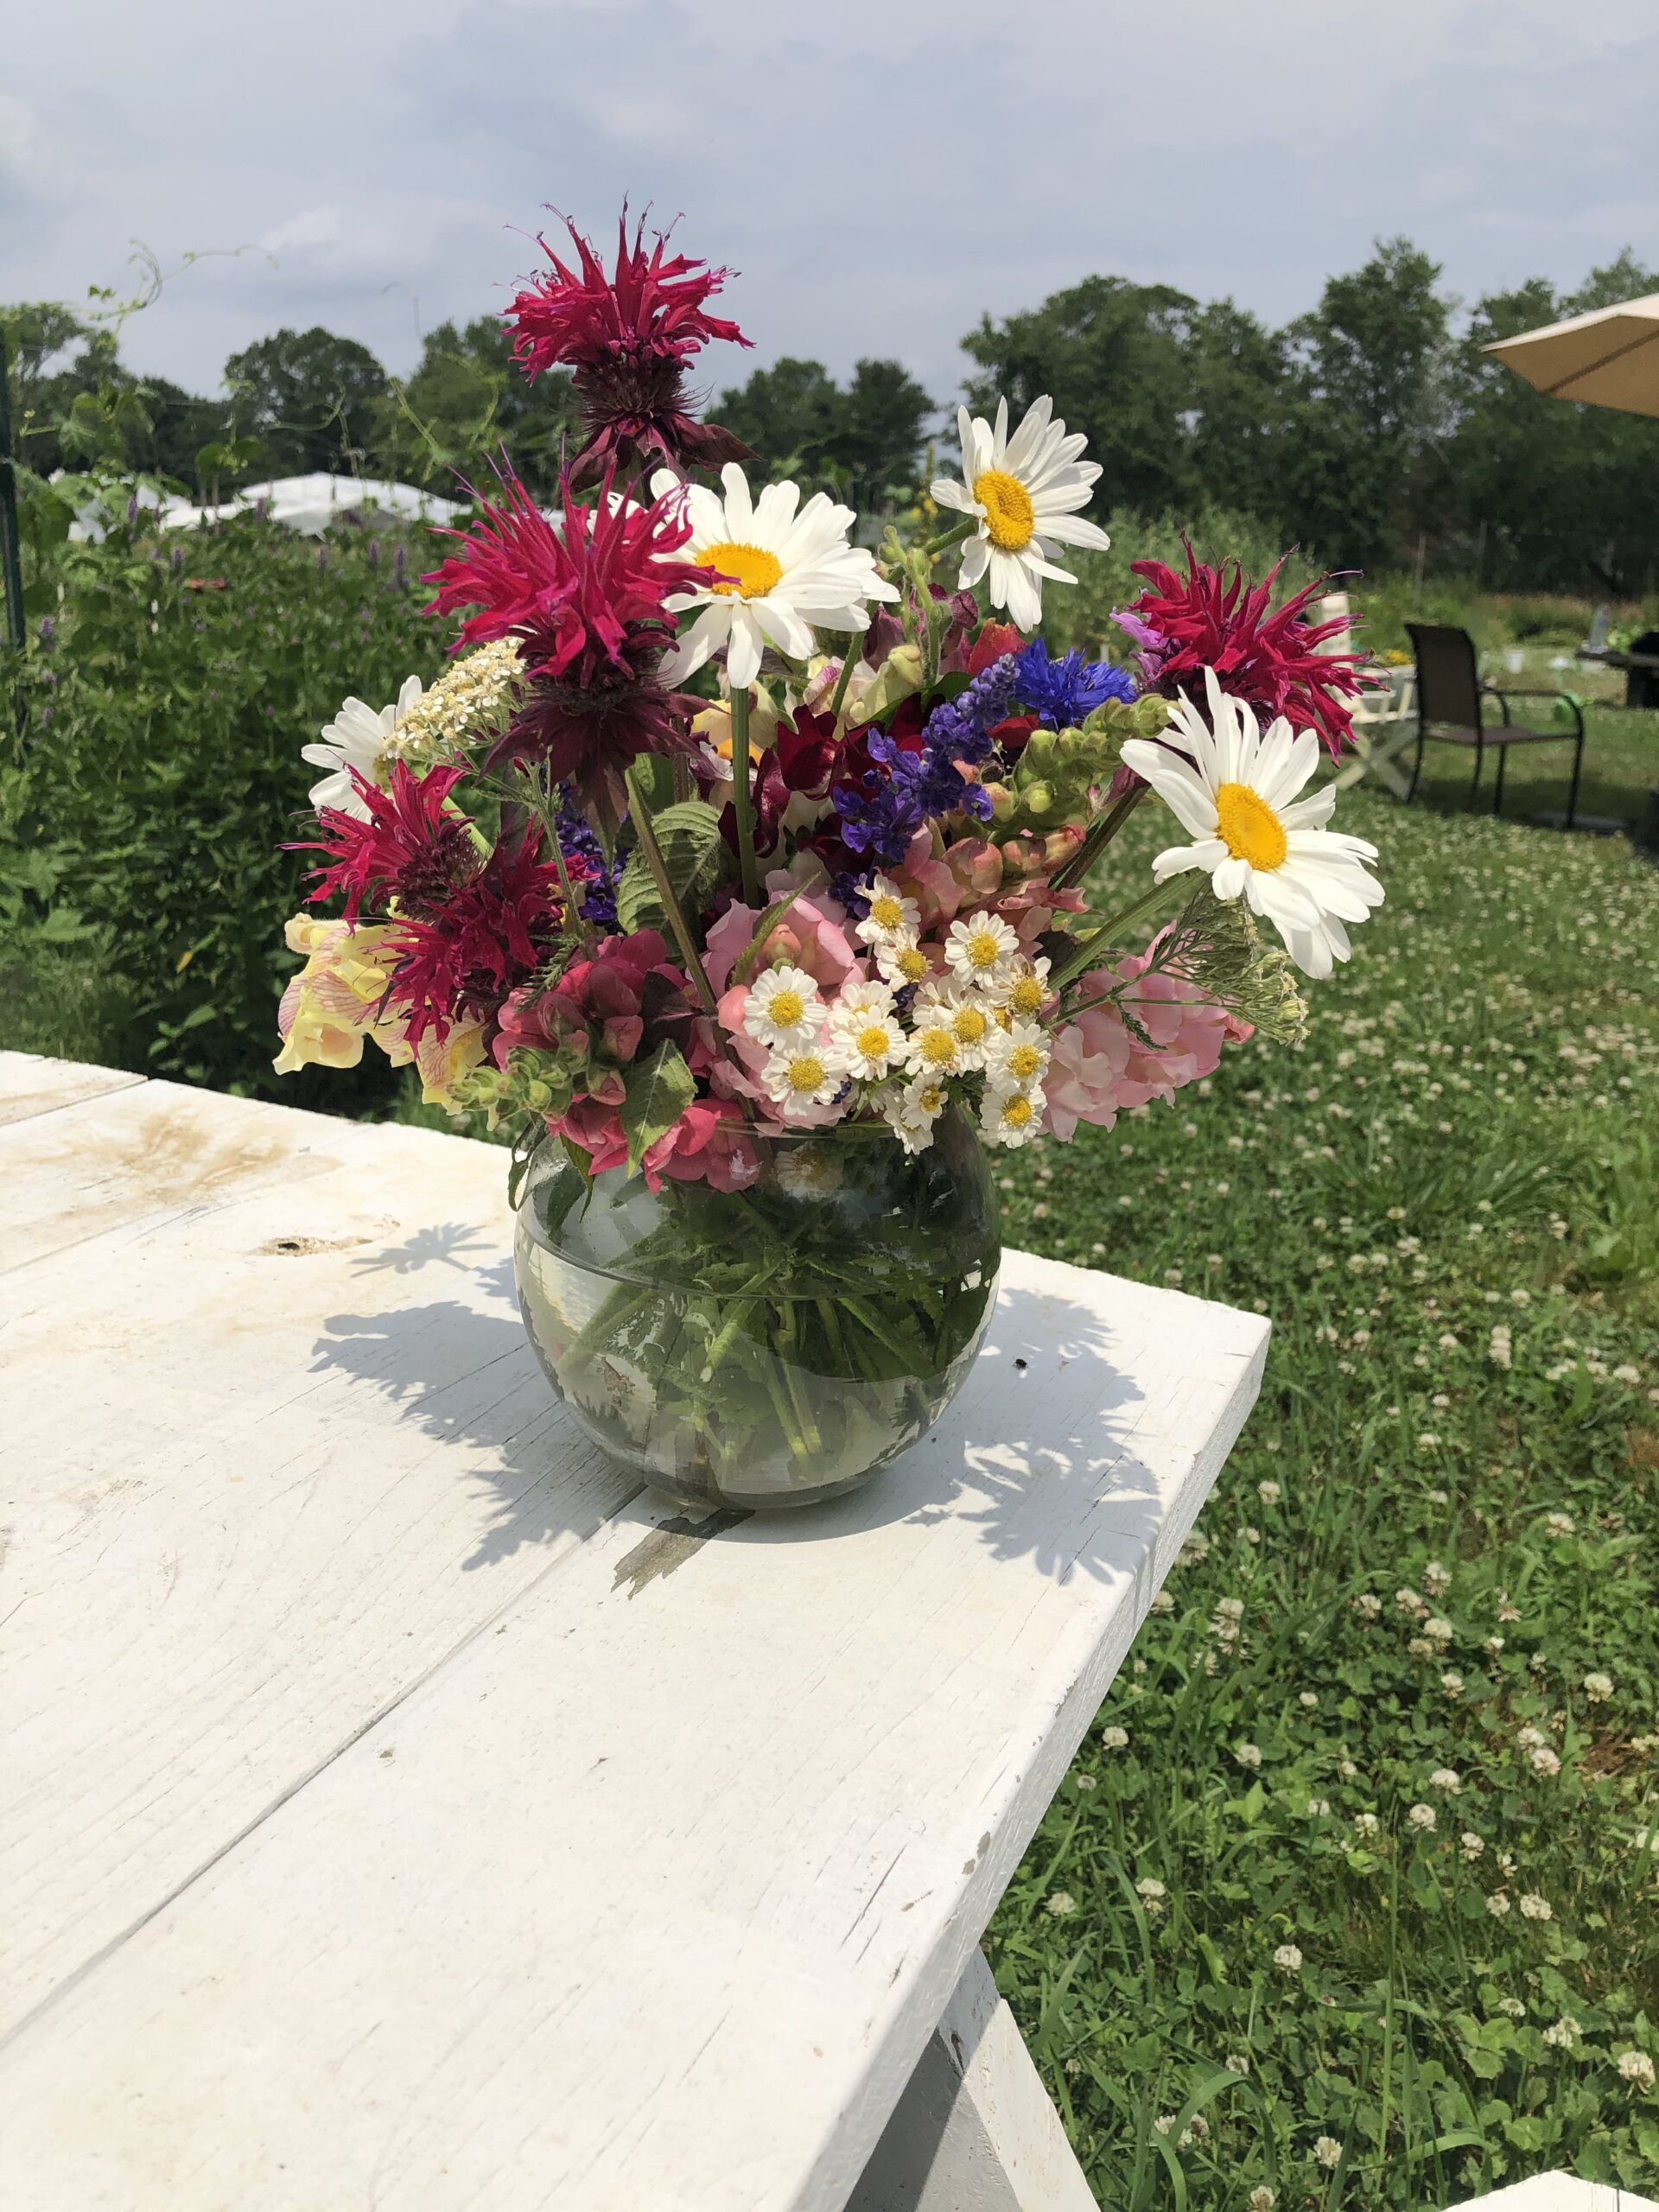 Growing native flowers from seed is a great way to lower carbon emissions generated in transport. Just recycle a paper coffee cup, add dirt and the seed and put it in the window. CINDY WARNE